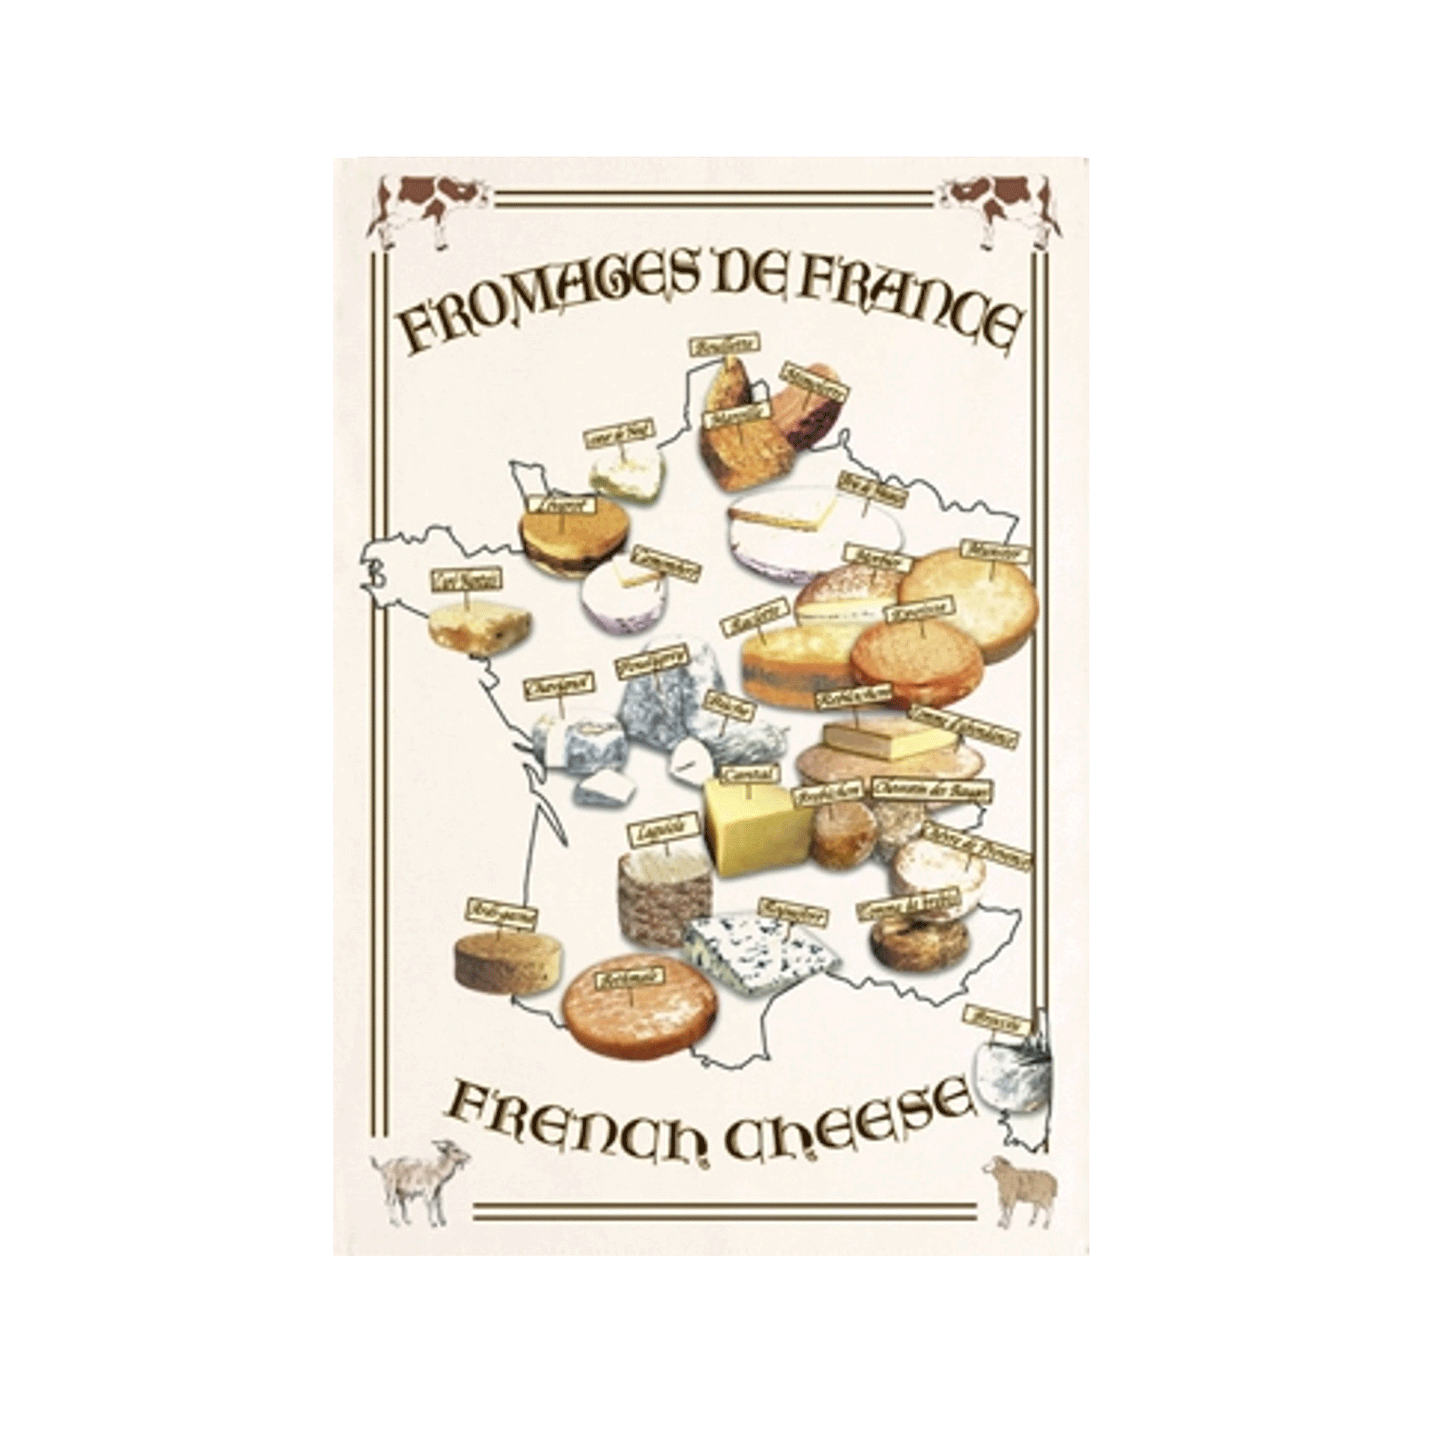 SPECIAL OFFER SAVE 10% Set of 3 French breads, cheeses and wines tea towels showing their French names and regions